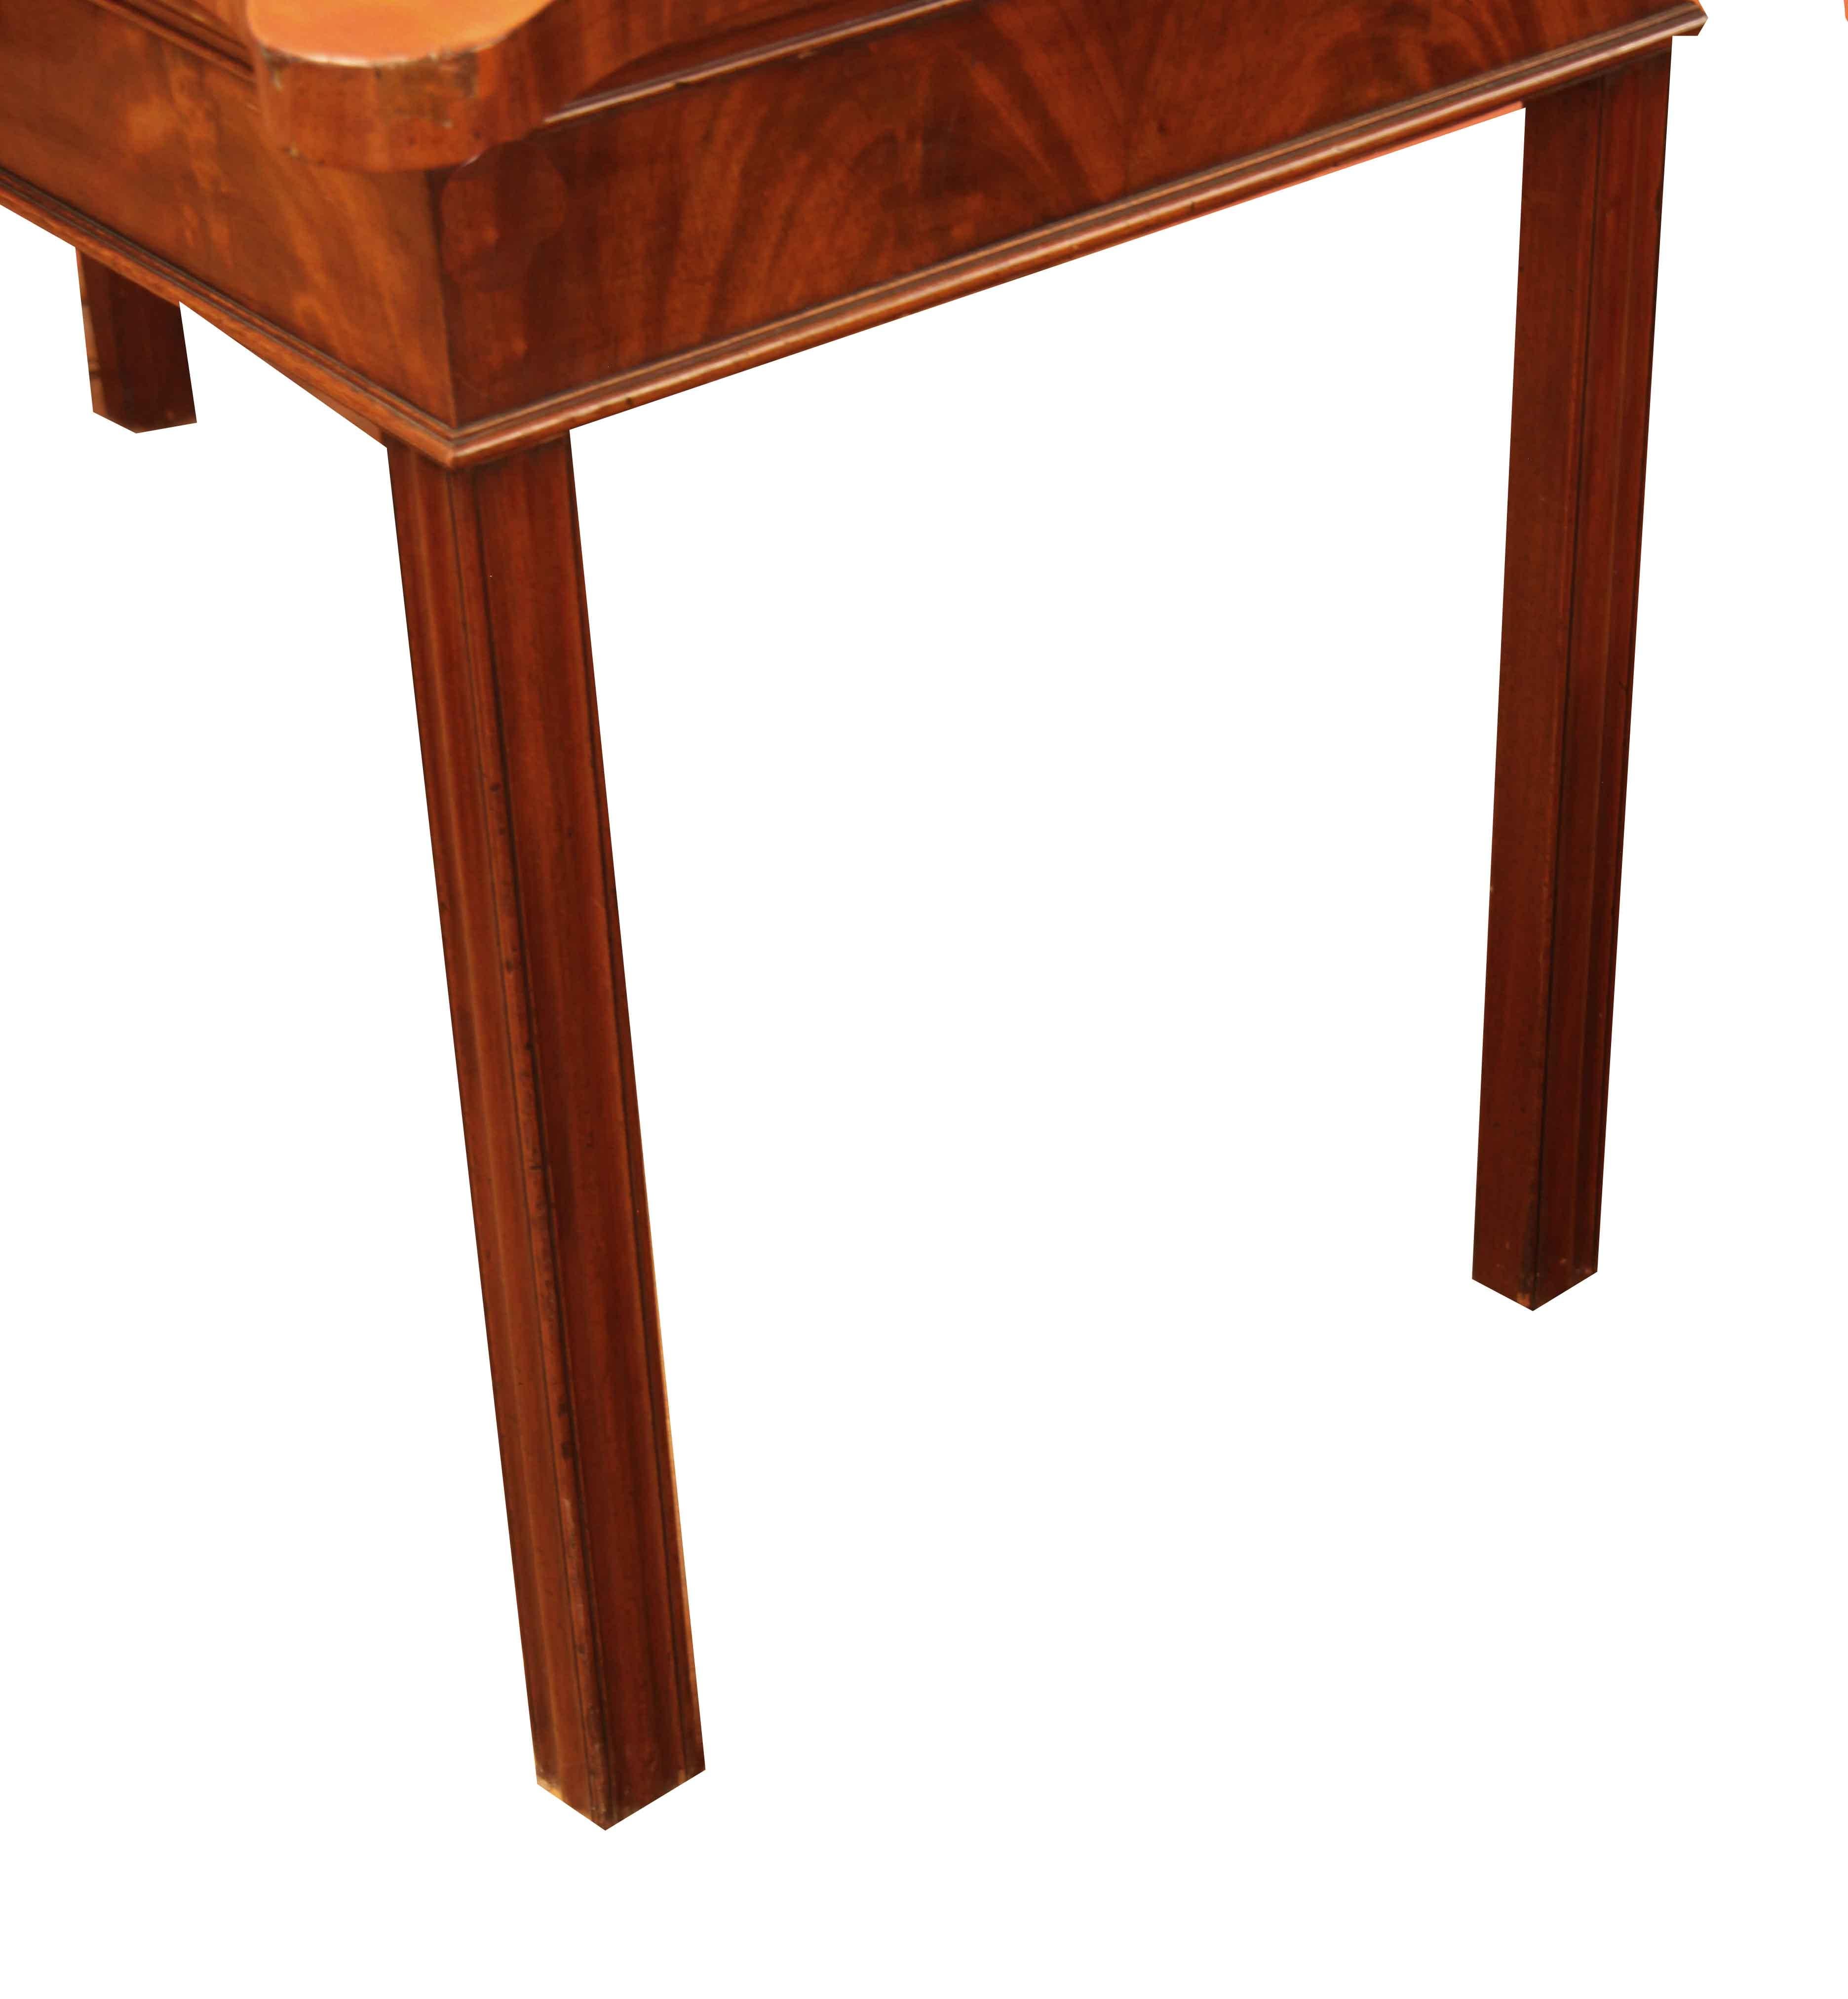 George III serpentine console table, the remarkably wide one board top with beautiful grain and color has a bold yet graceful serpentine shape, sides of the top are shaped as well; the flat edge of the top is cross banded in mahogany, this above a